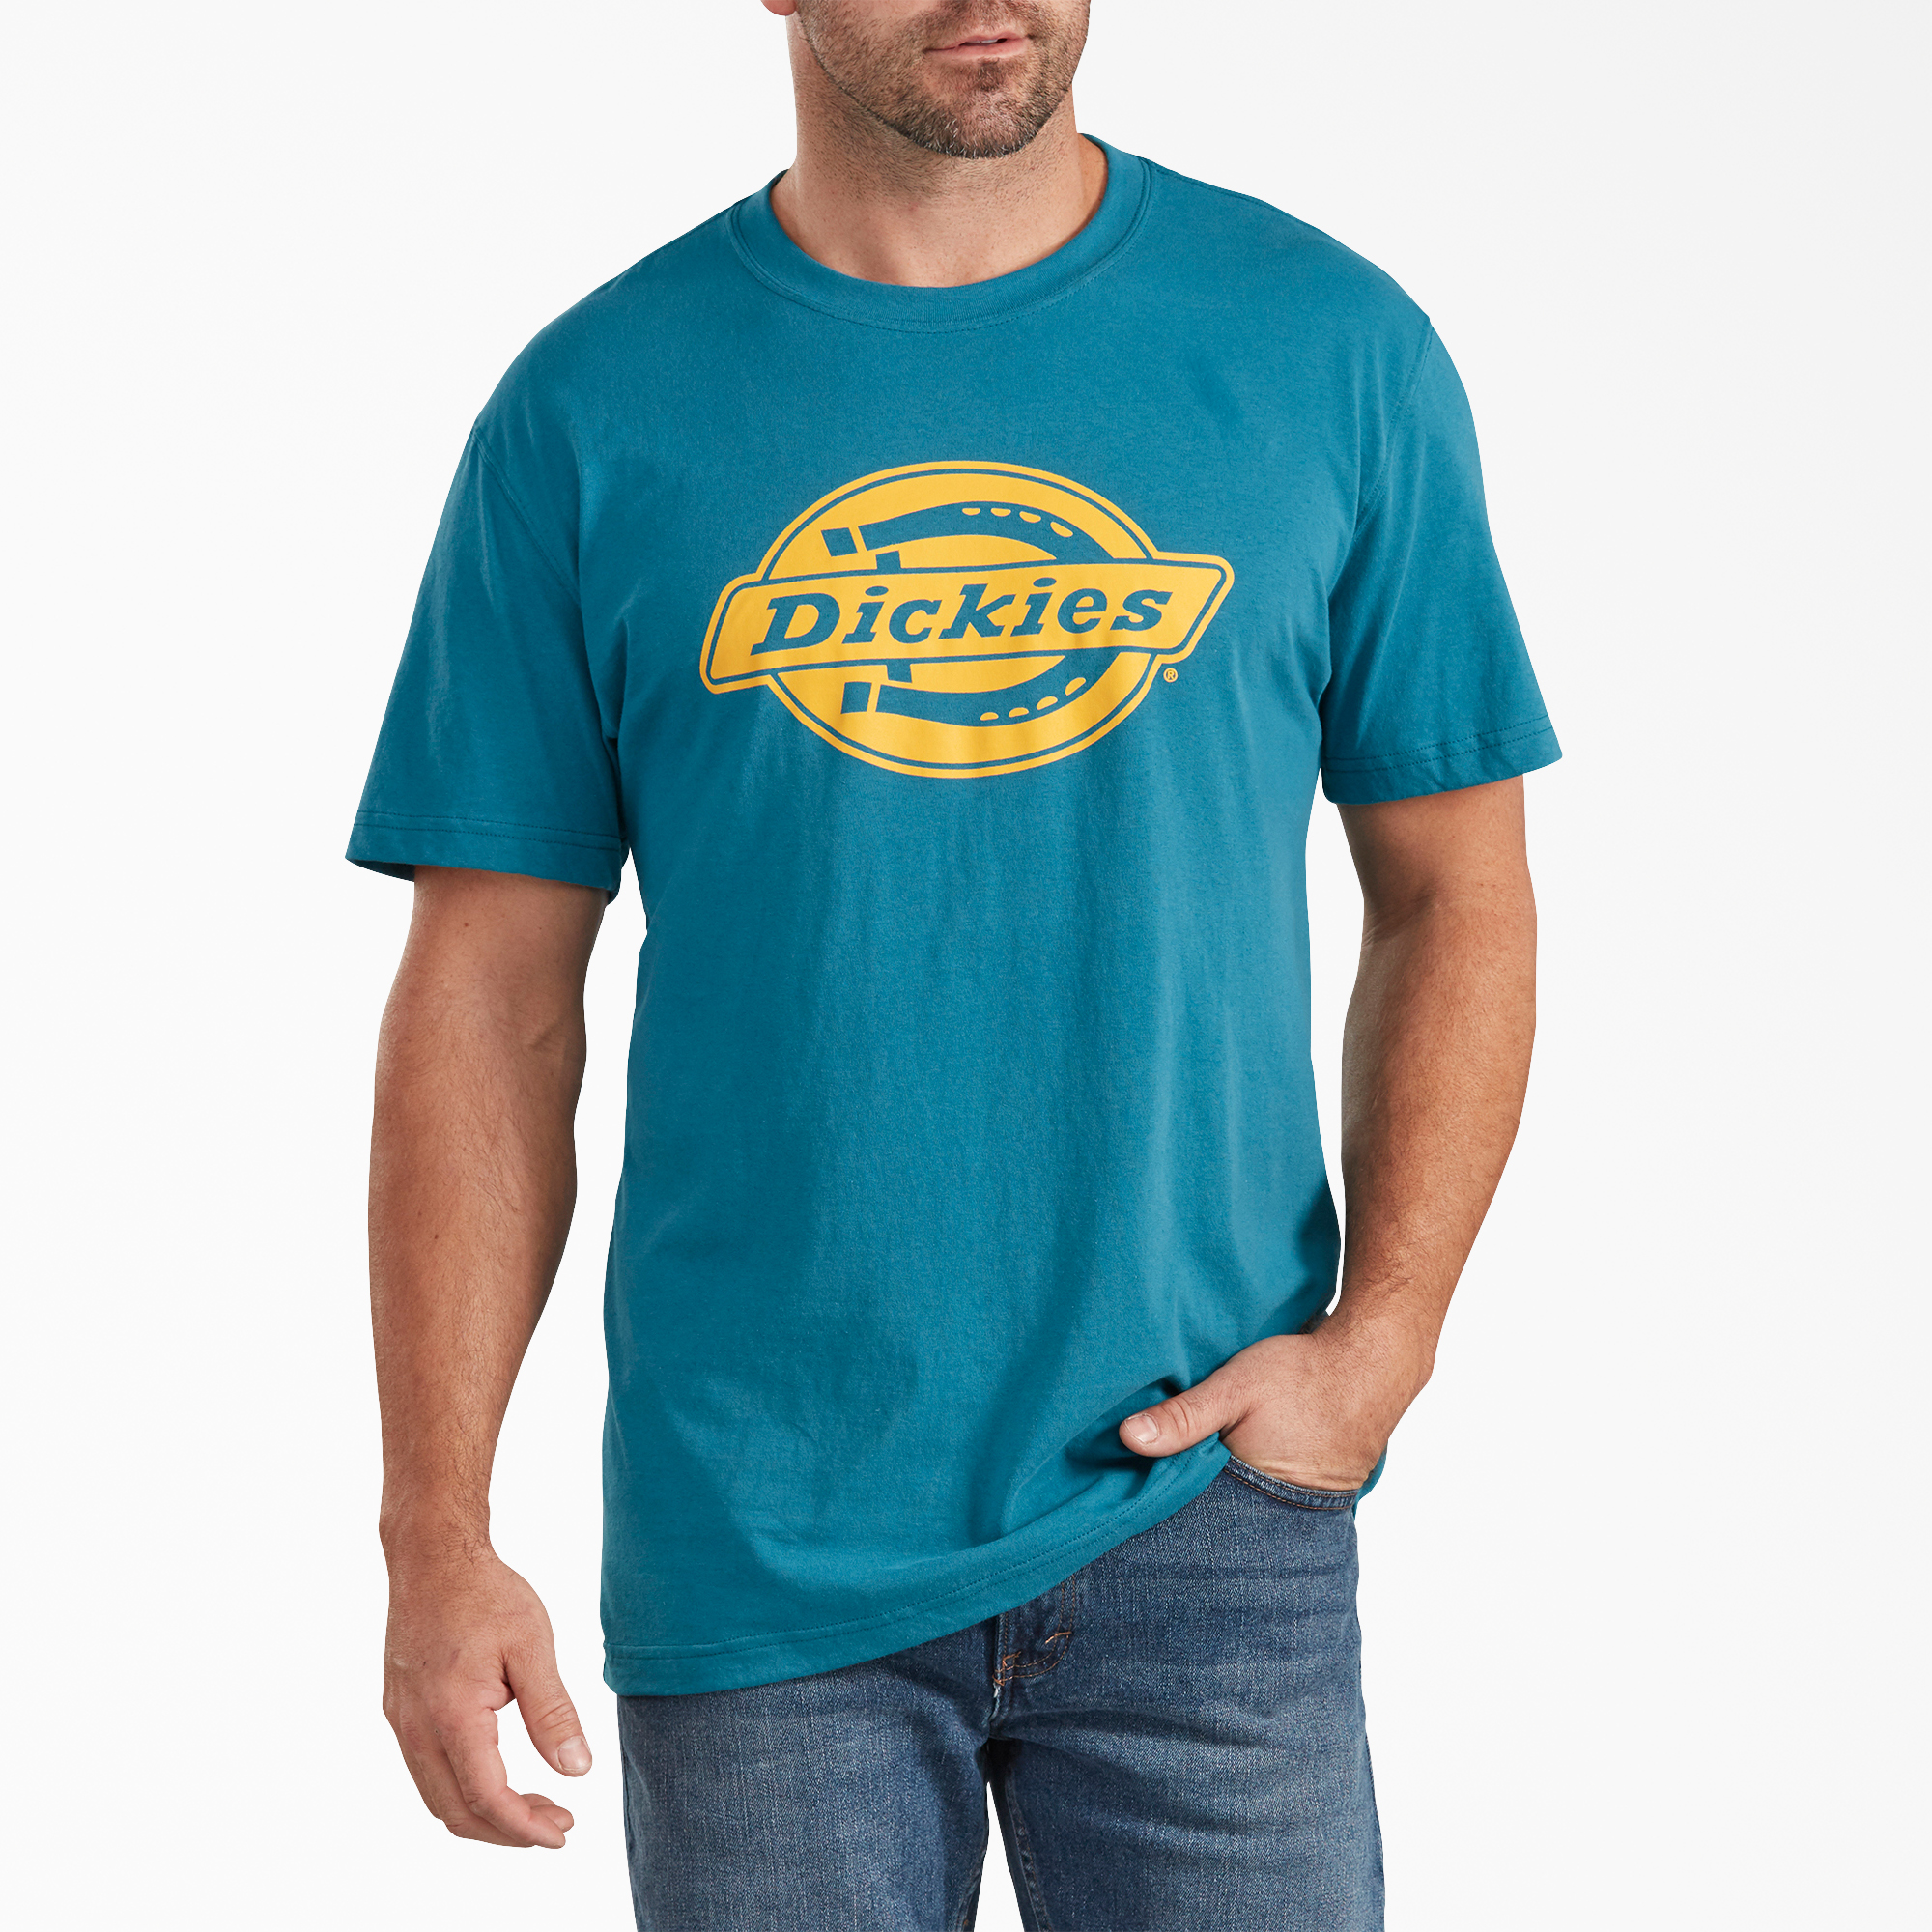 Short Sleeve Relaxed Fit Graphic T-Shirt - Teal (TL)